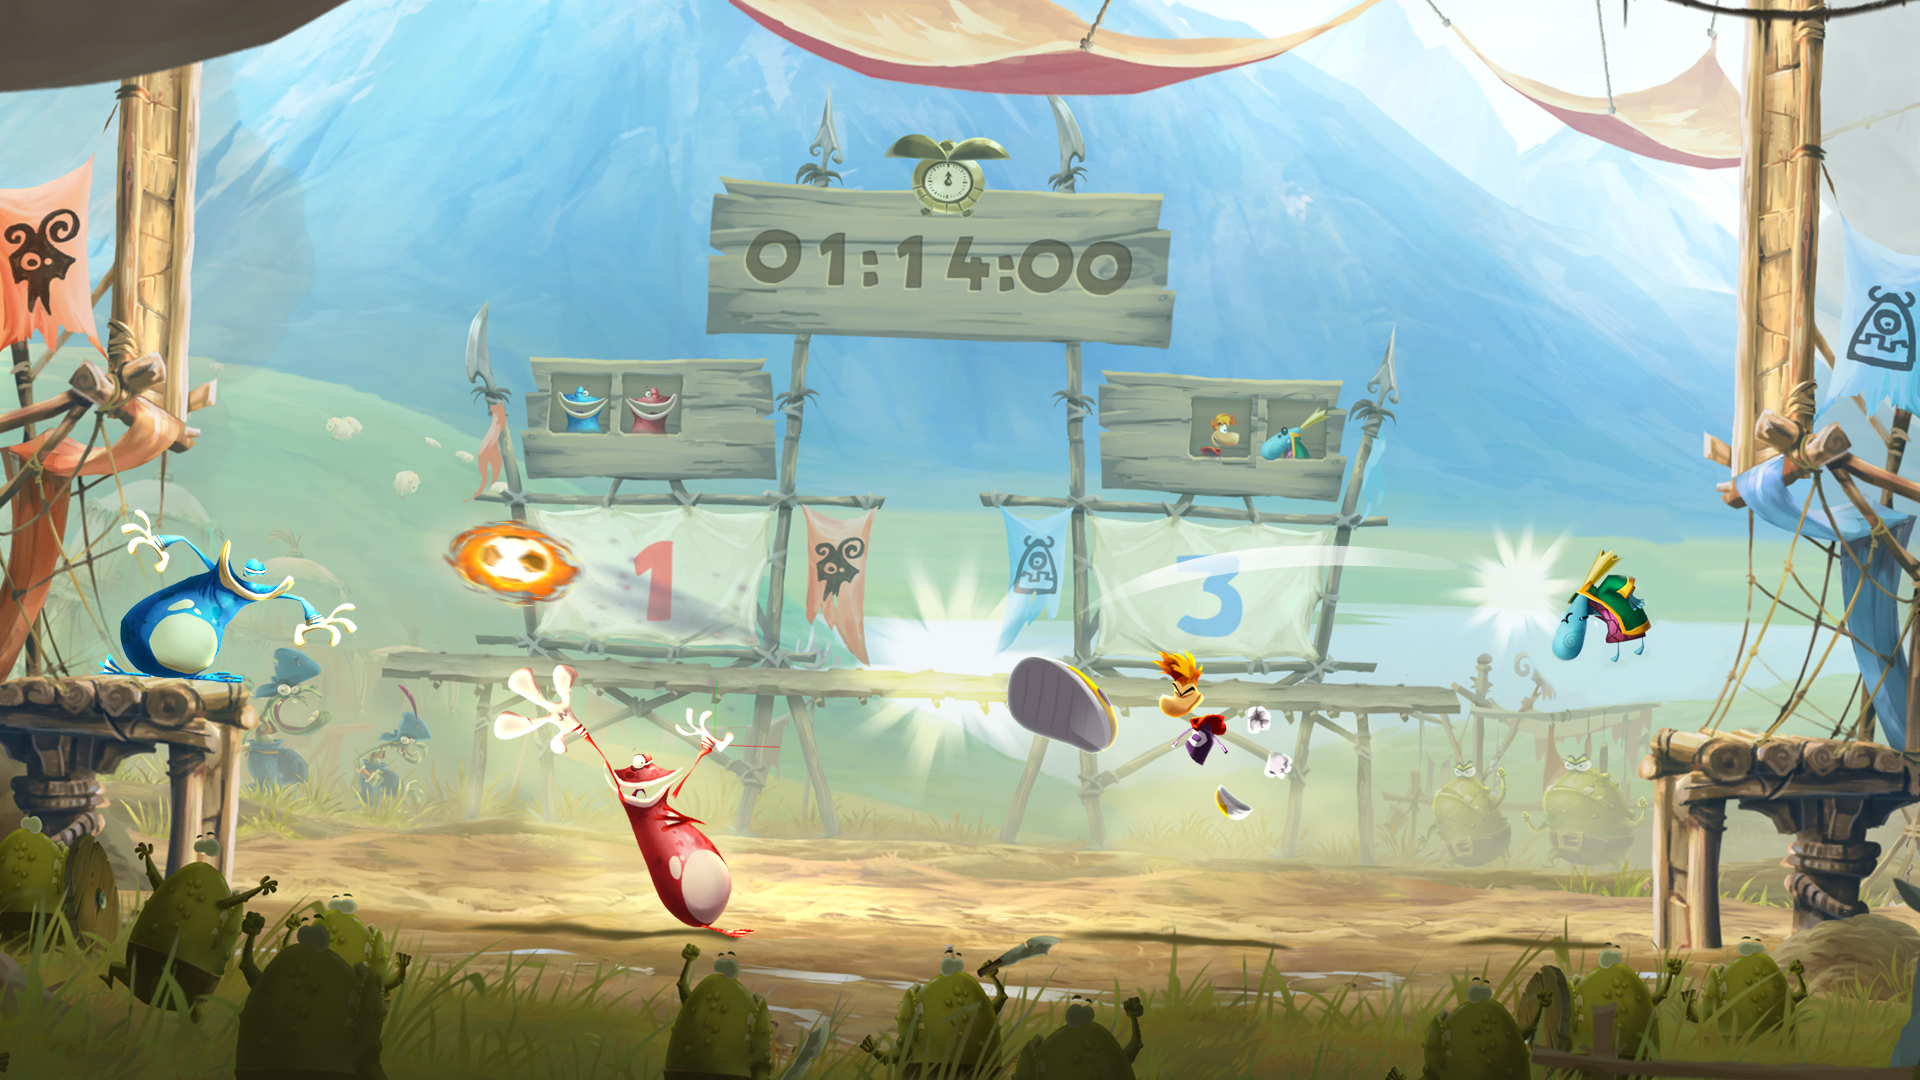 1370783845_raymanlegends_screen_kungfoot_e3_130610_4h15pmpt